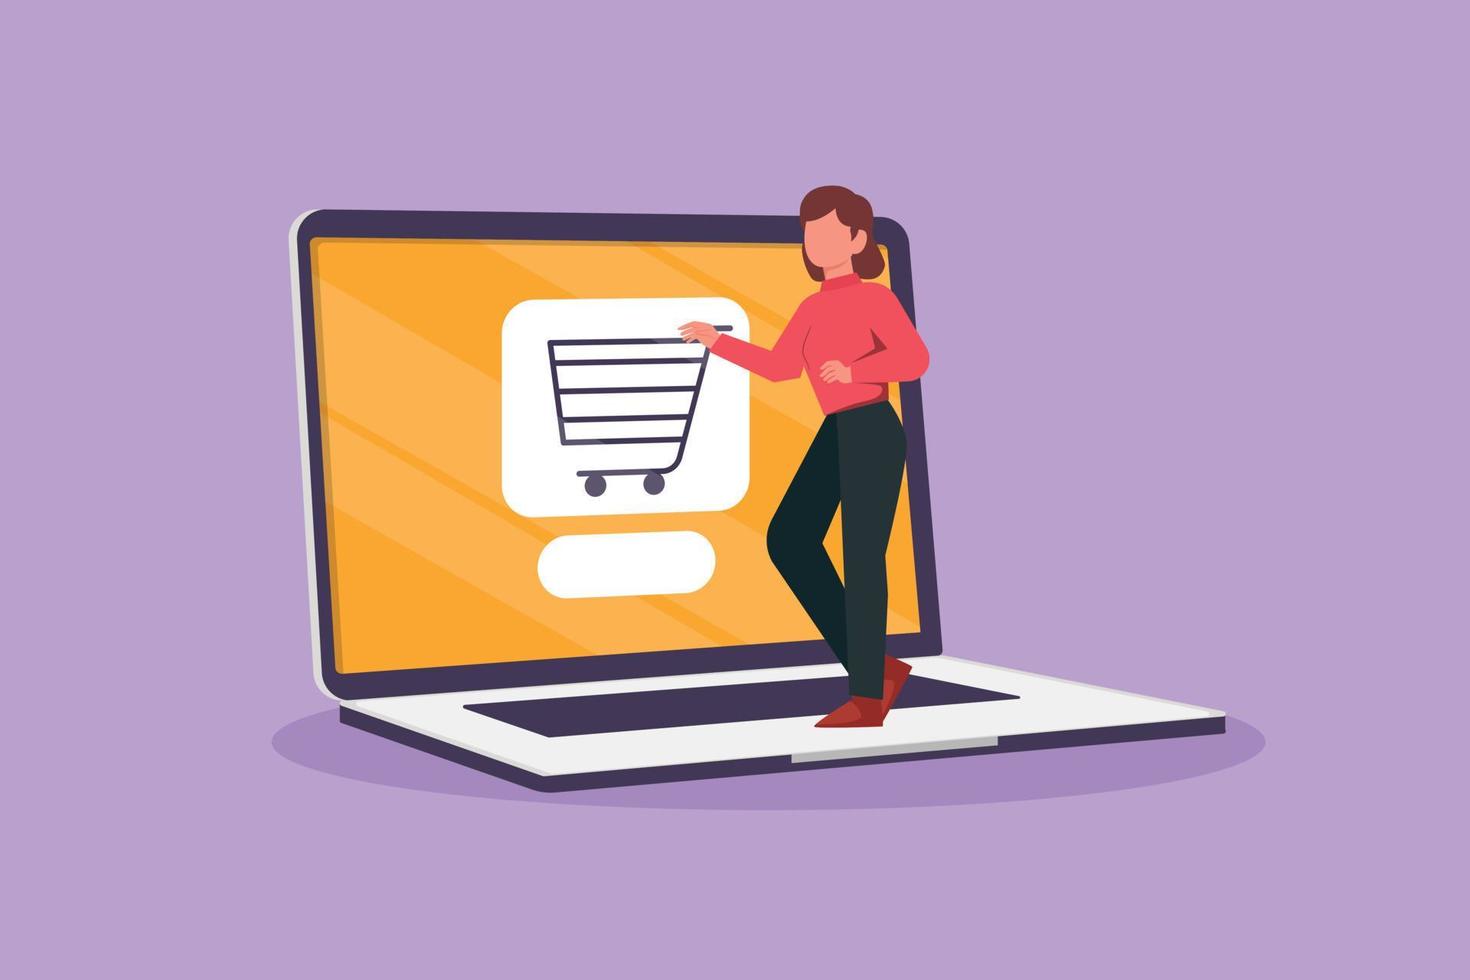 Graphic flat design drawing young female standing and buying online via giant laptop screen with shopping cart inside. Digital store technology, consumerism concept. Cartoon style vector illustration